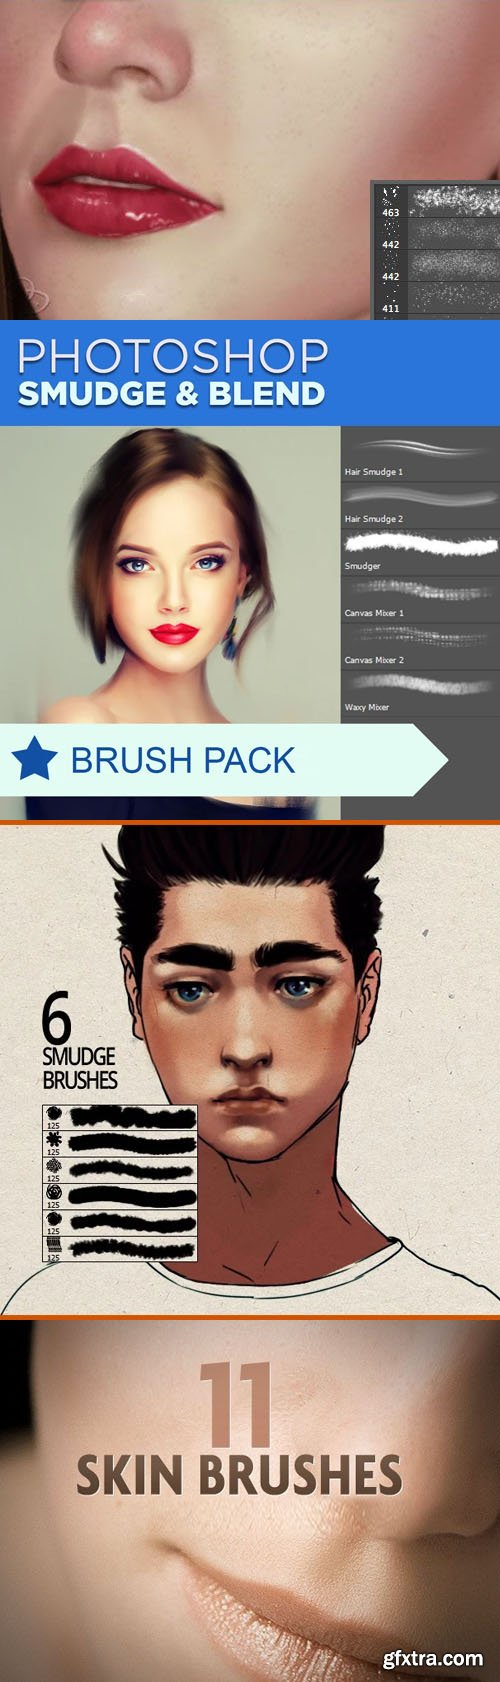 Human Skin & Smudge Brushes Collection for Photoshop